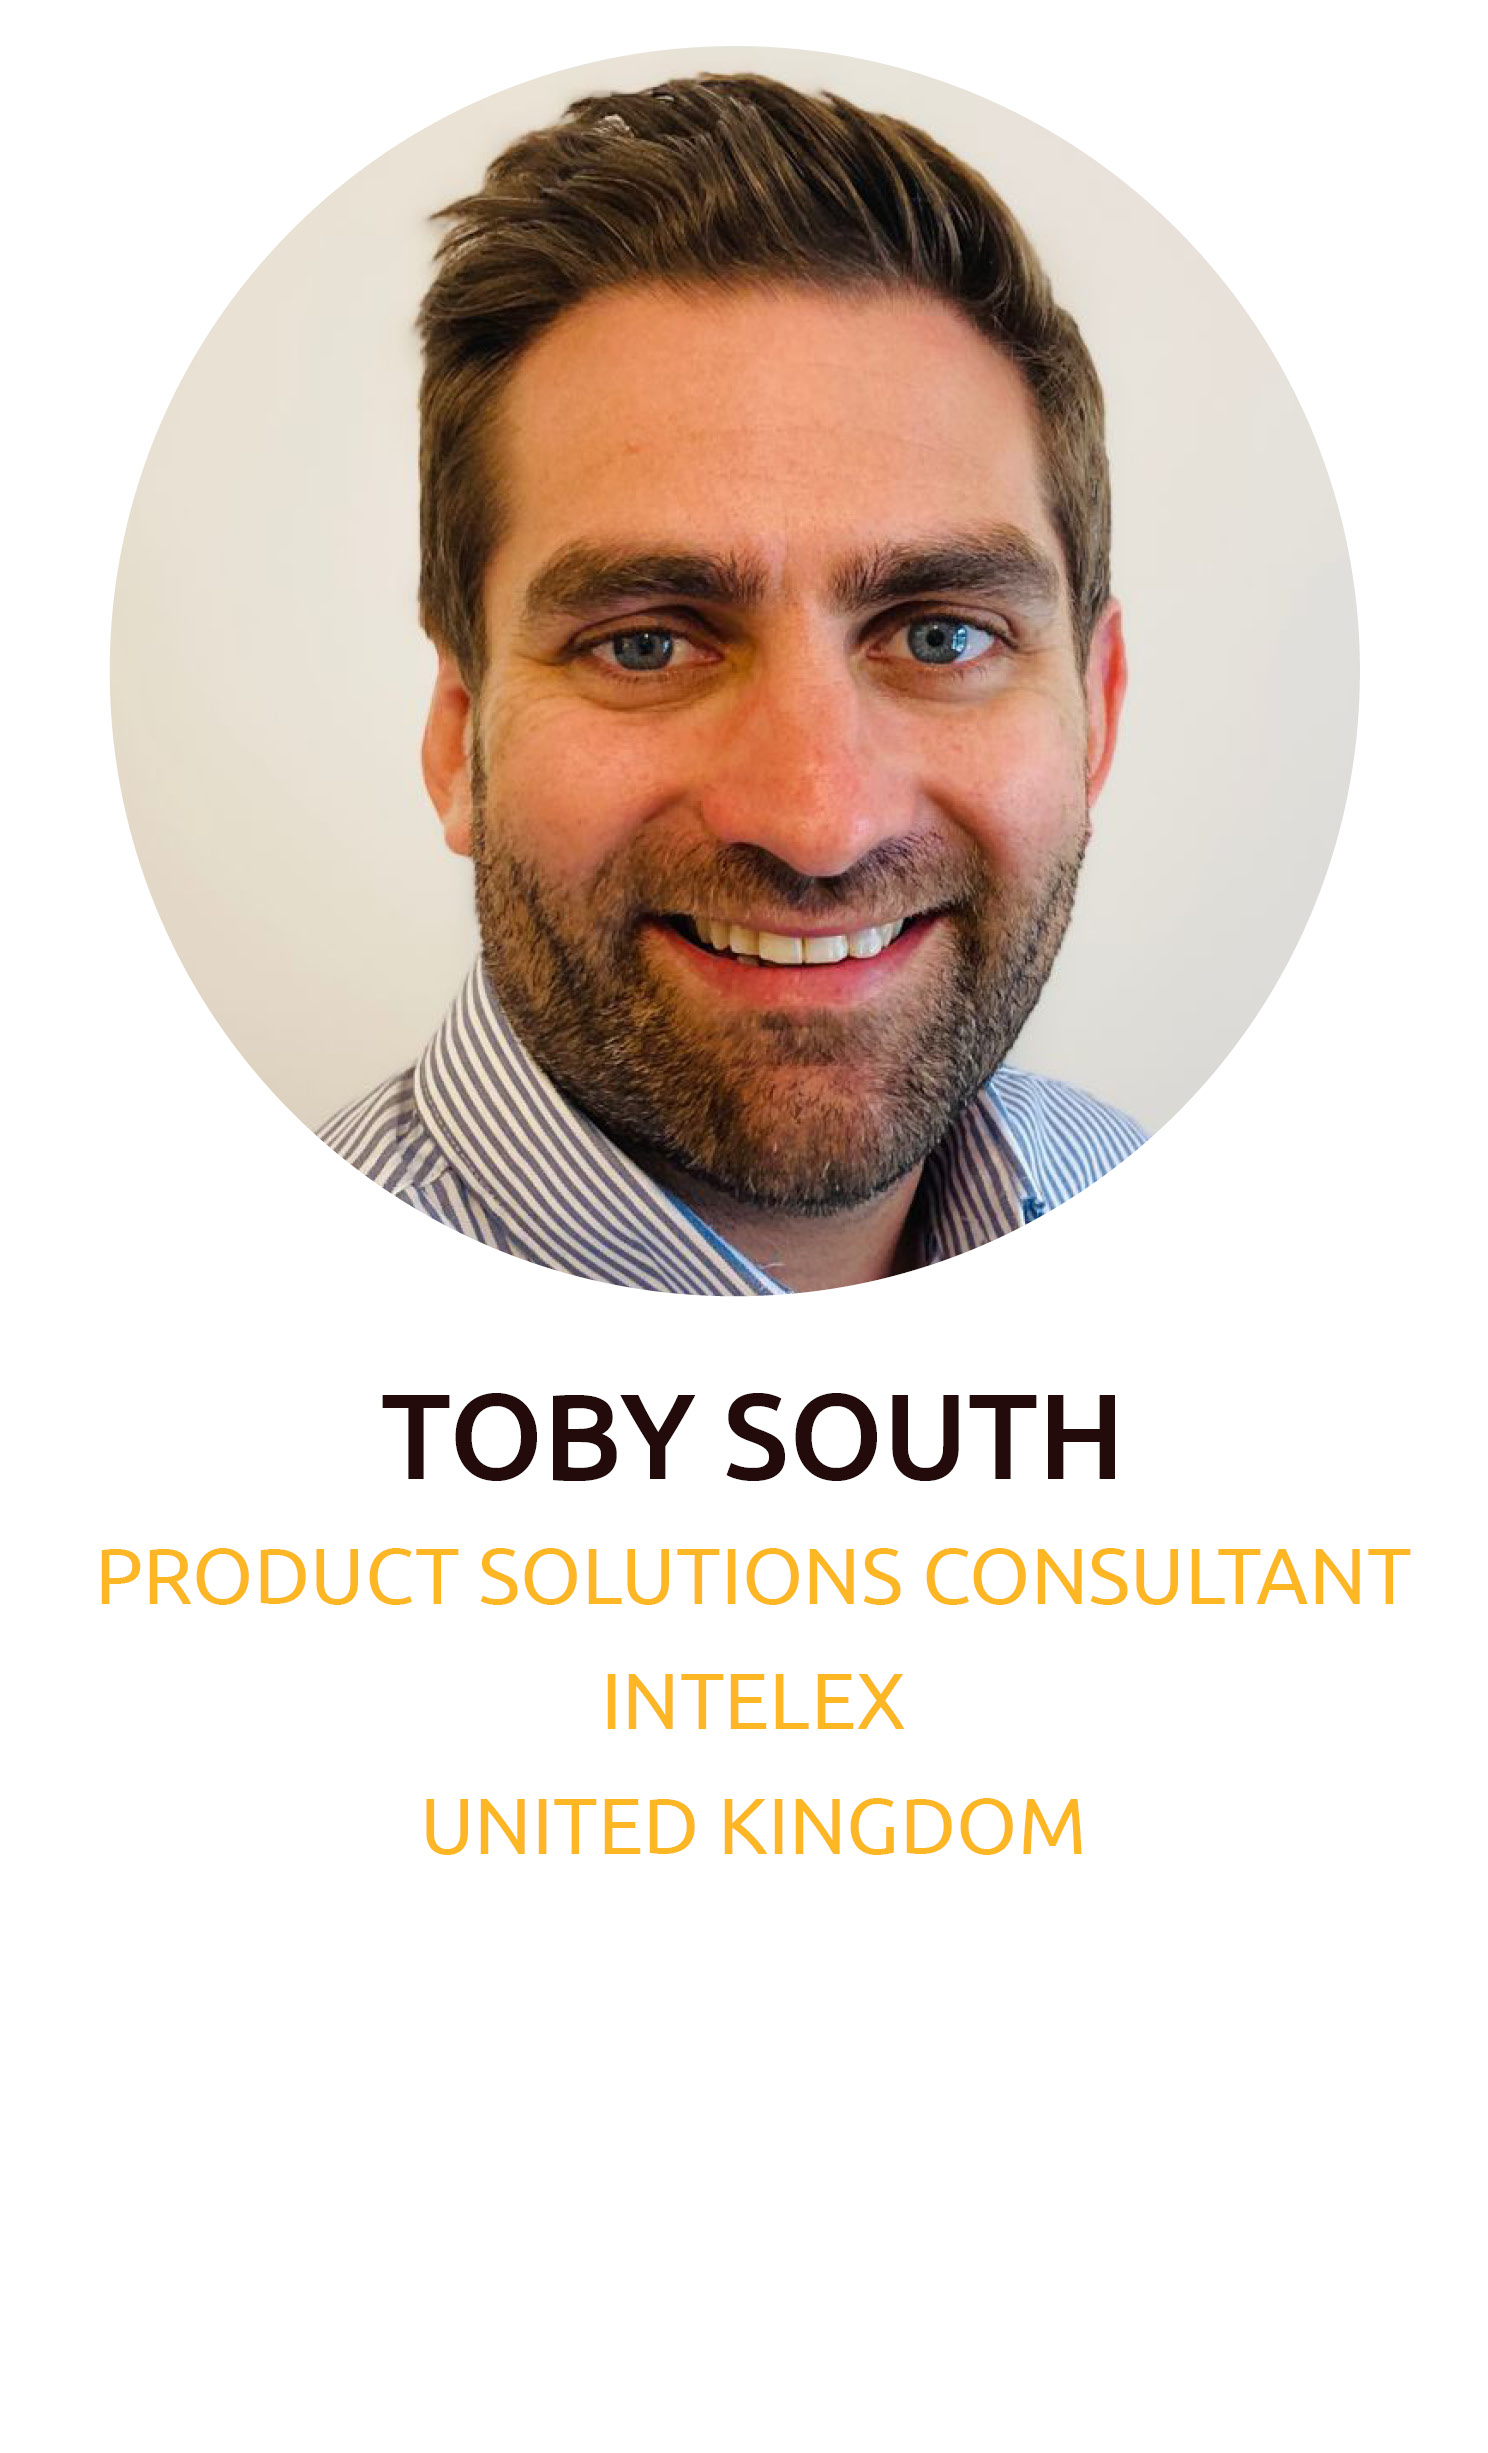 Toby South